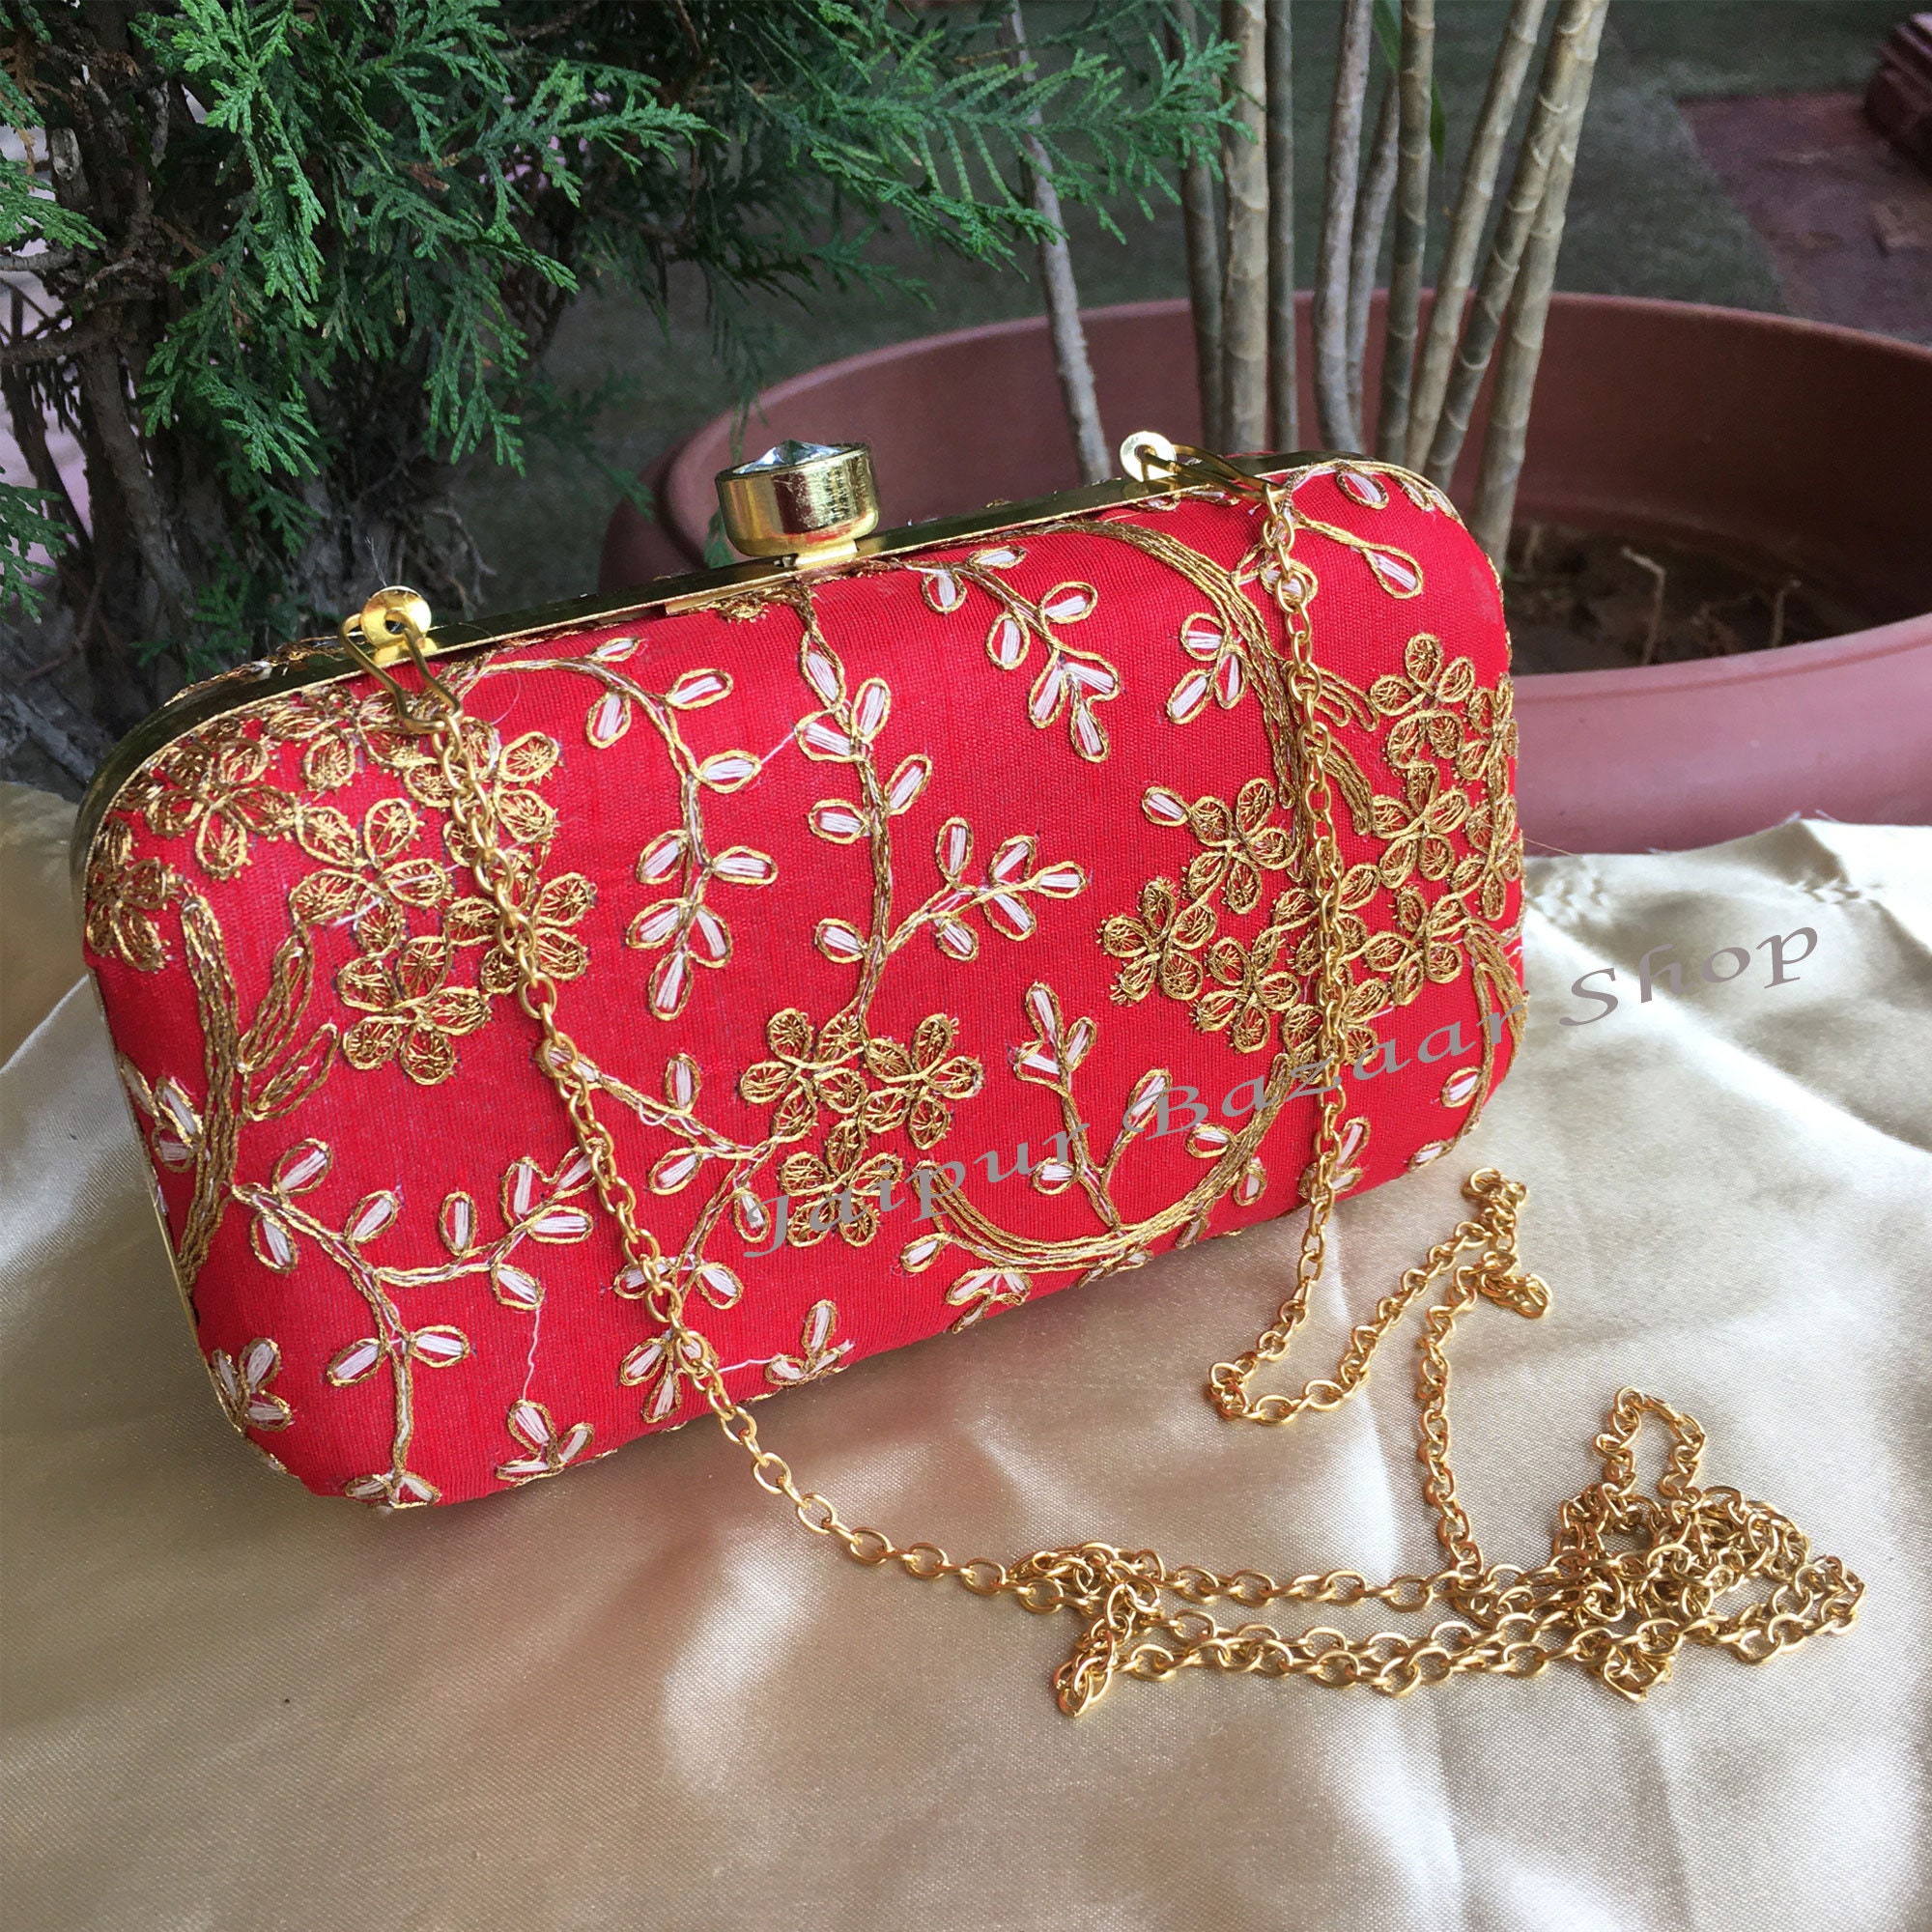 Buy ethnic beautiful handbags clutches bags 4 pc Combo Set For Women Online  at Best Prices on UdaipurBazar.com - Shop online women fashion,  indo-western, ethnic wear, sari, suits, kurtis, watches, gifts.